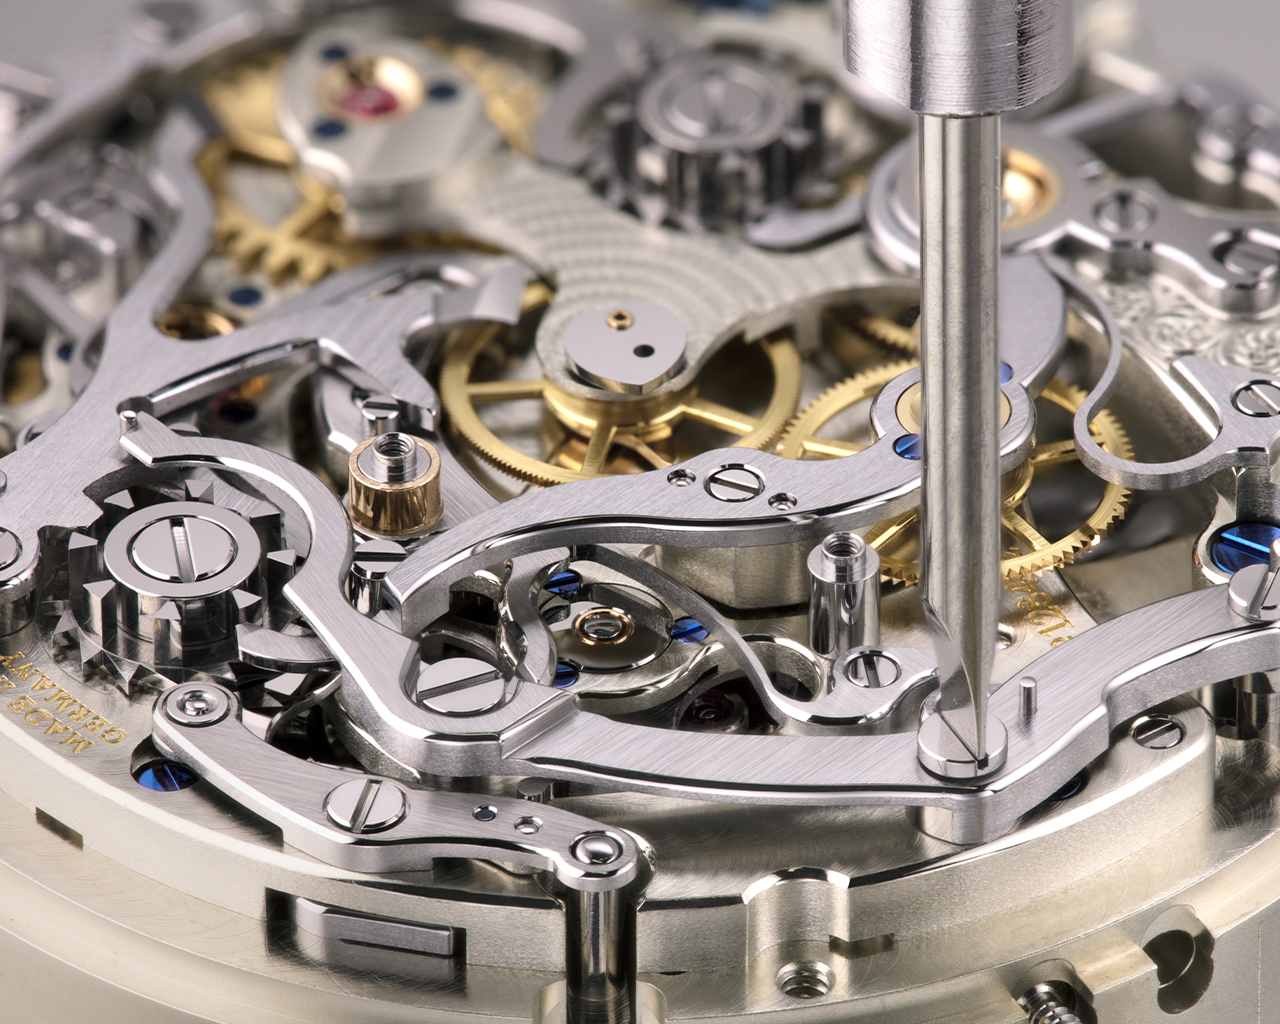 The chronograph and rattrapante mechanism is located on the movement side. It consists of a total of 136 parts. During the assembly phase, all of the individual parts of the elaborate column-wheel ensemble are manually tweaked and adjusted. This is because the wheels, levers, arbors and springs involved in the complex switching sequences must interact in a precisely defined order within fractions of a second to prevent mechanical conflicts.